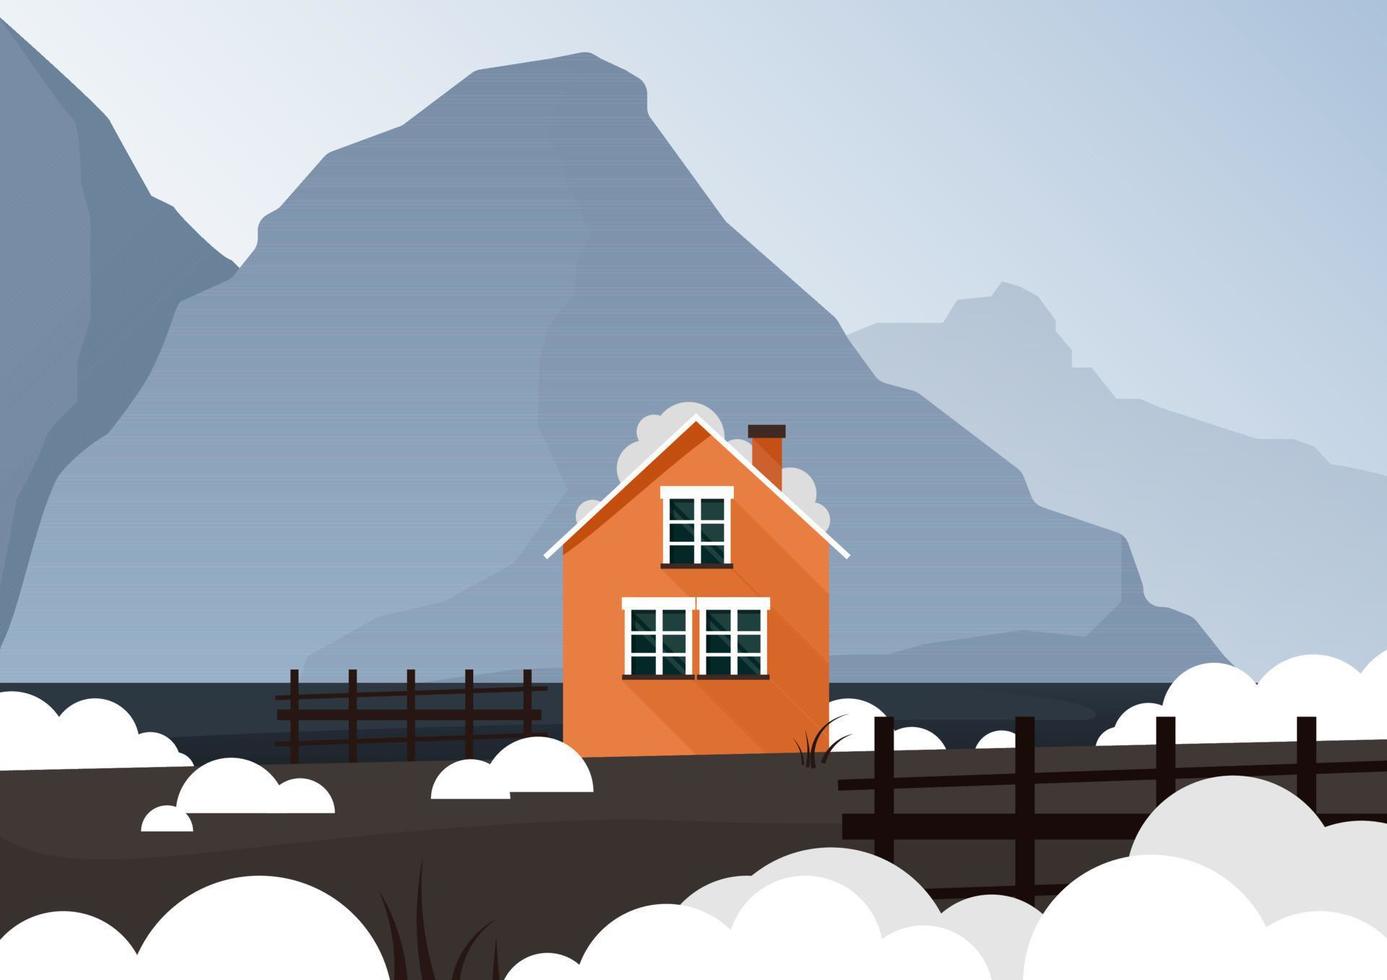 A bright orange house stands among the mountains in winter vector